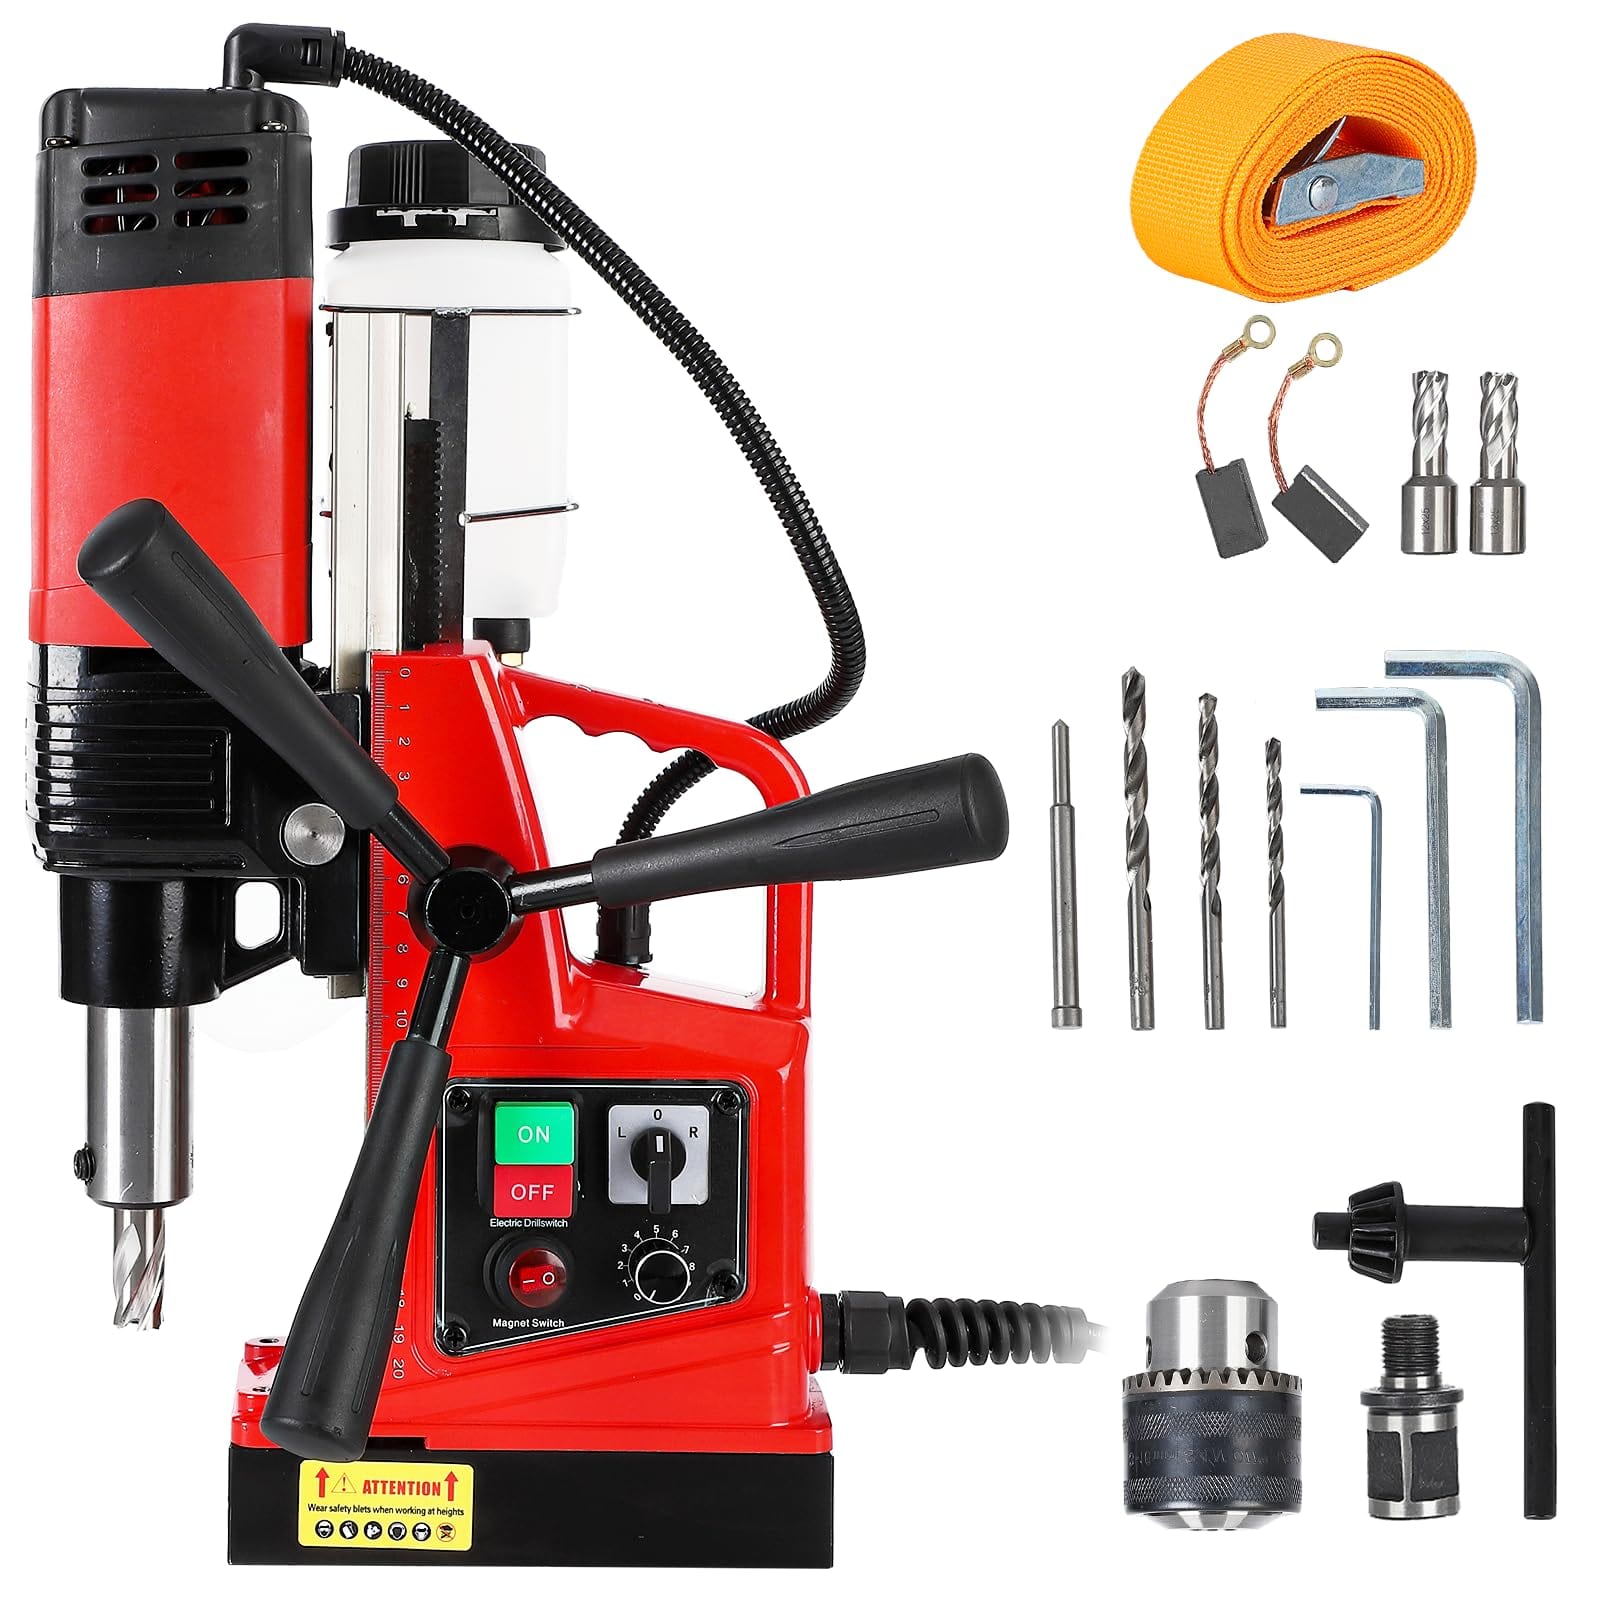 1.57 Inch 1300W Mag Drill Press,Dia 2922lbf for Industrial Use